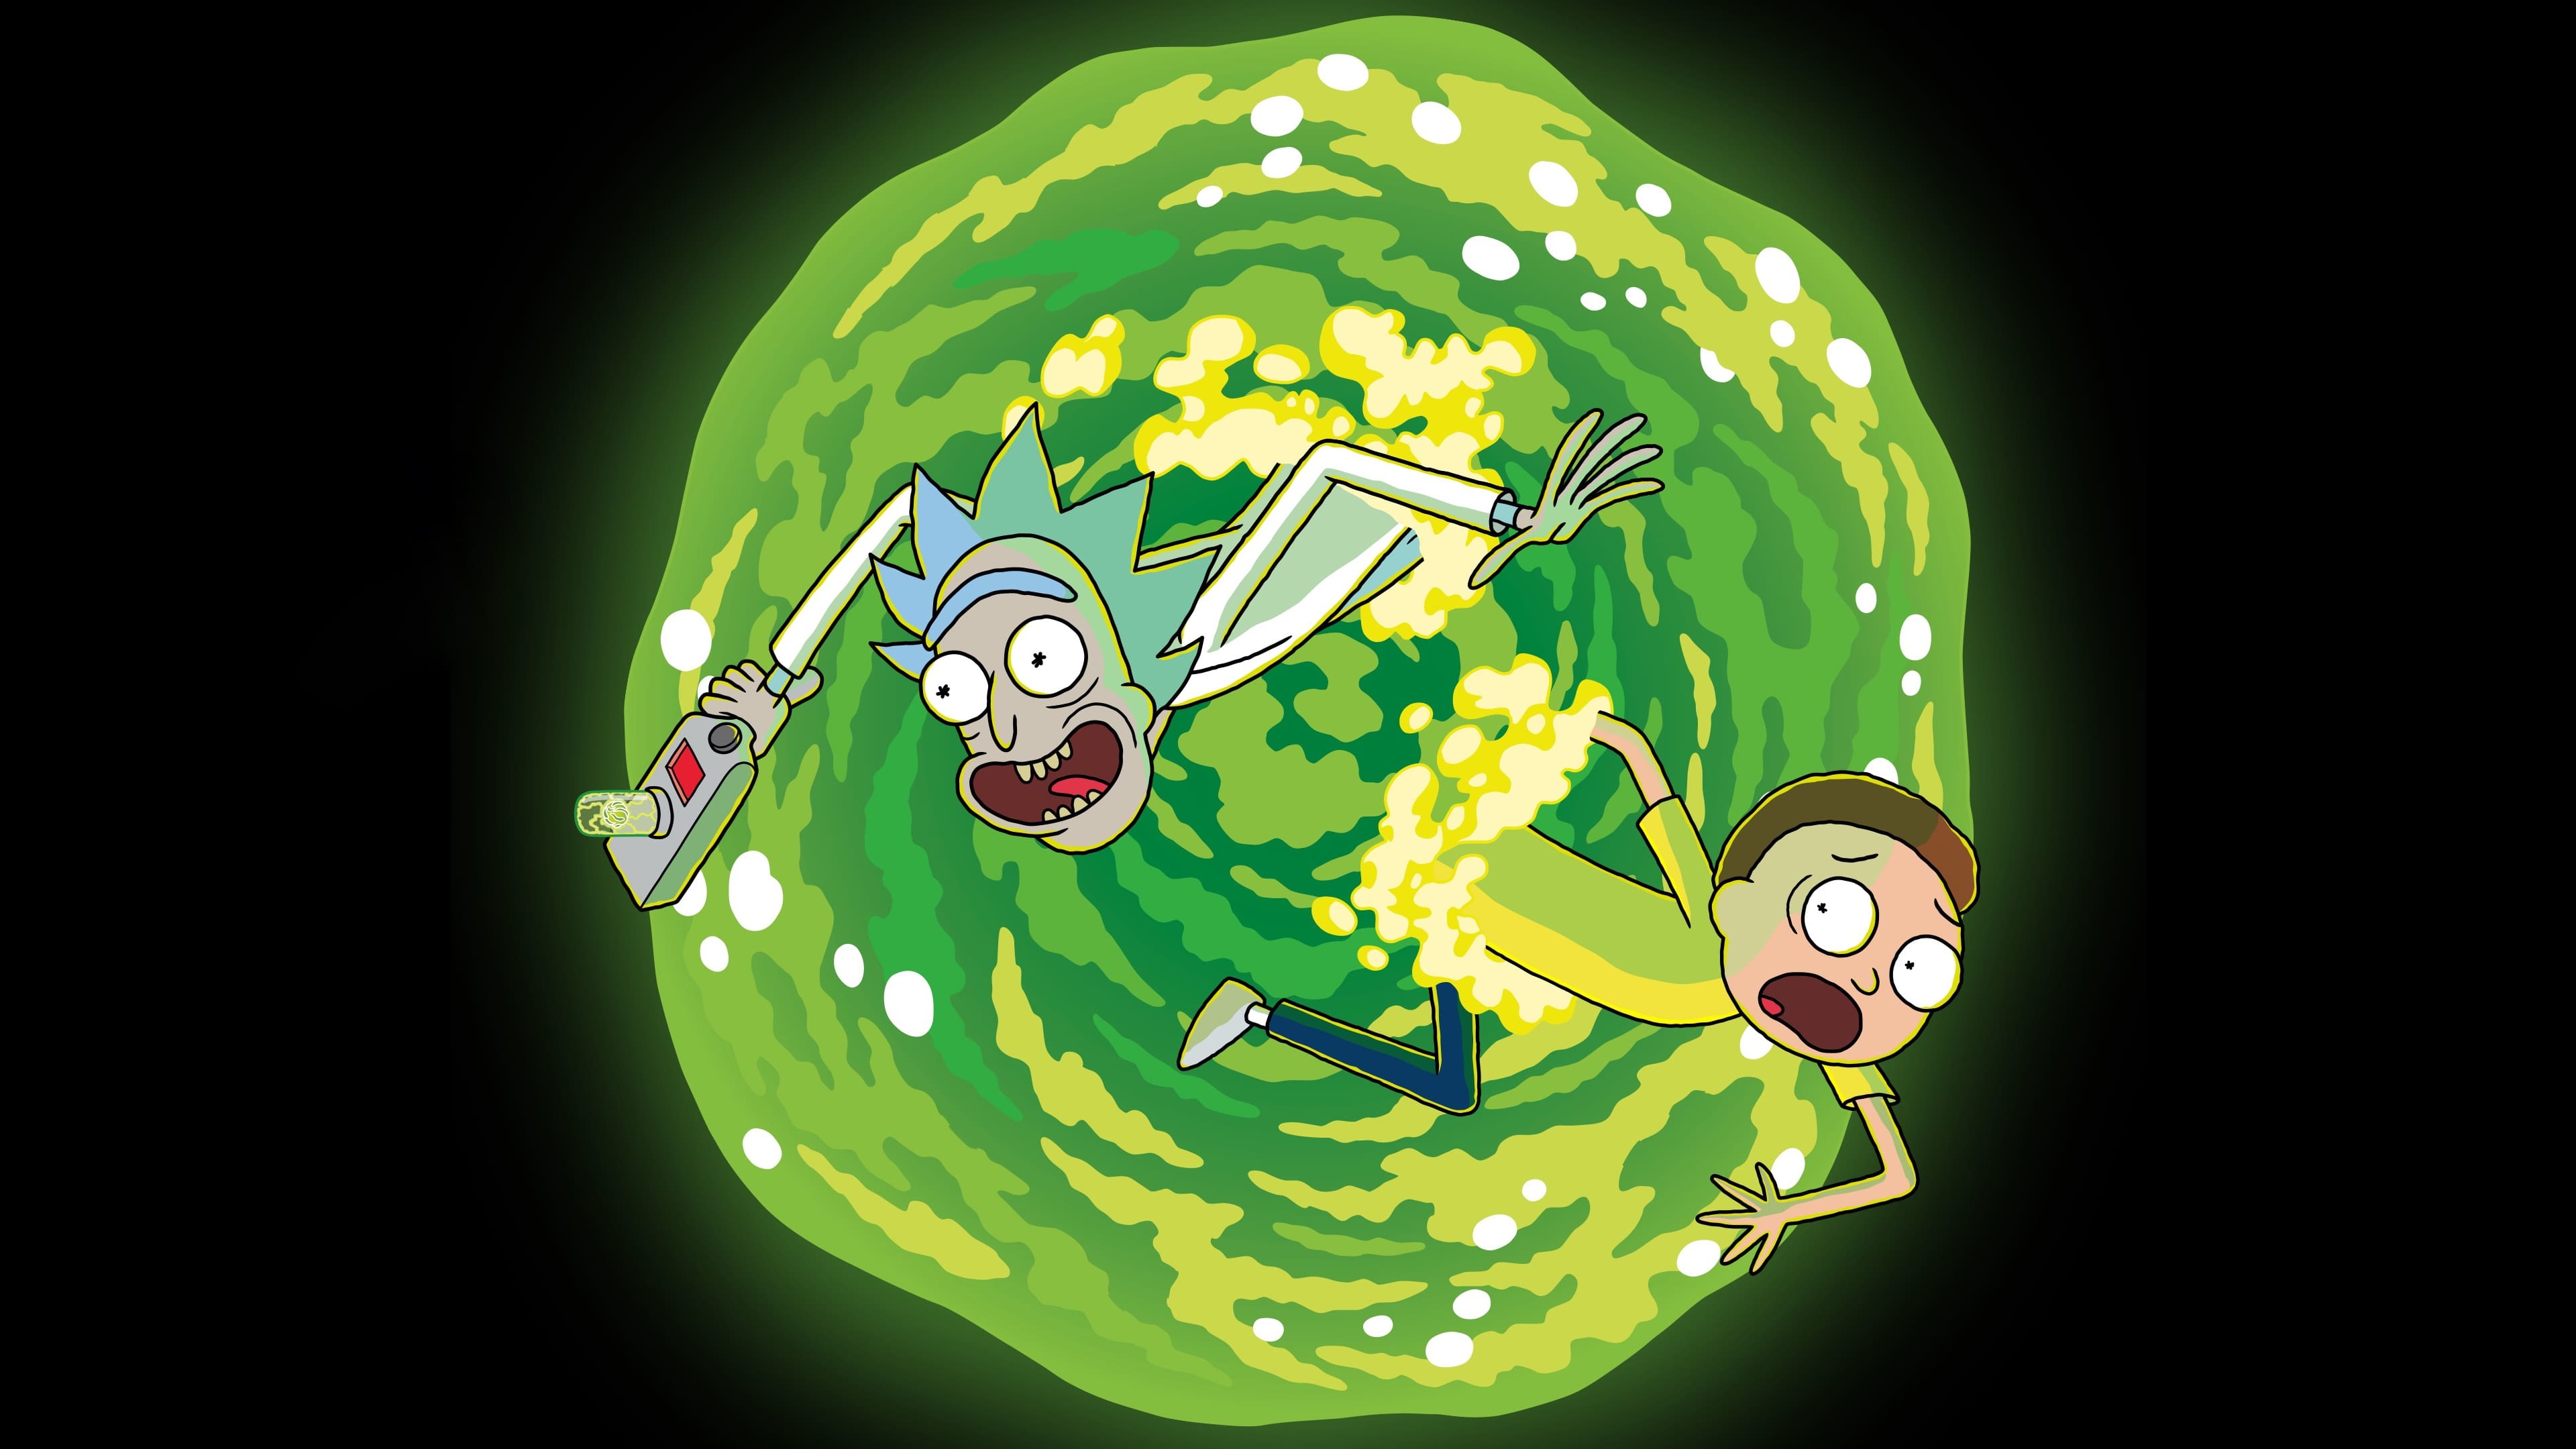 4K Rick and Morty 2020 Wallpaper, HD TV Series 4K Wallpapers, Images